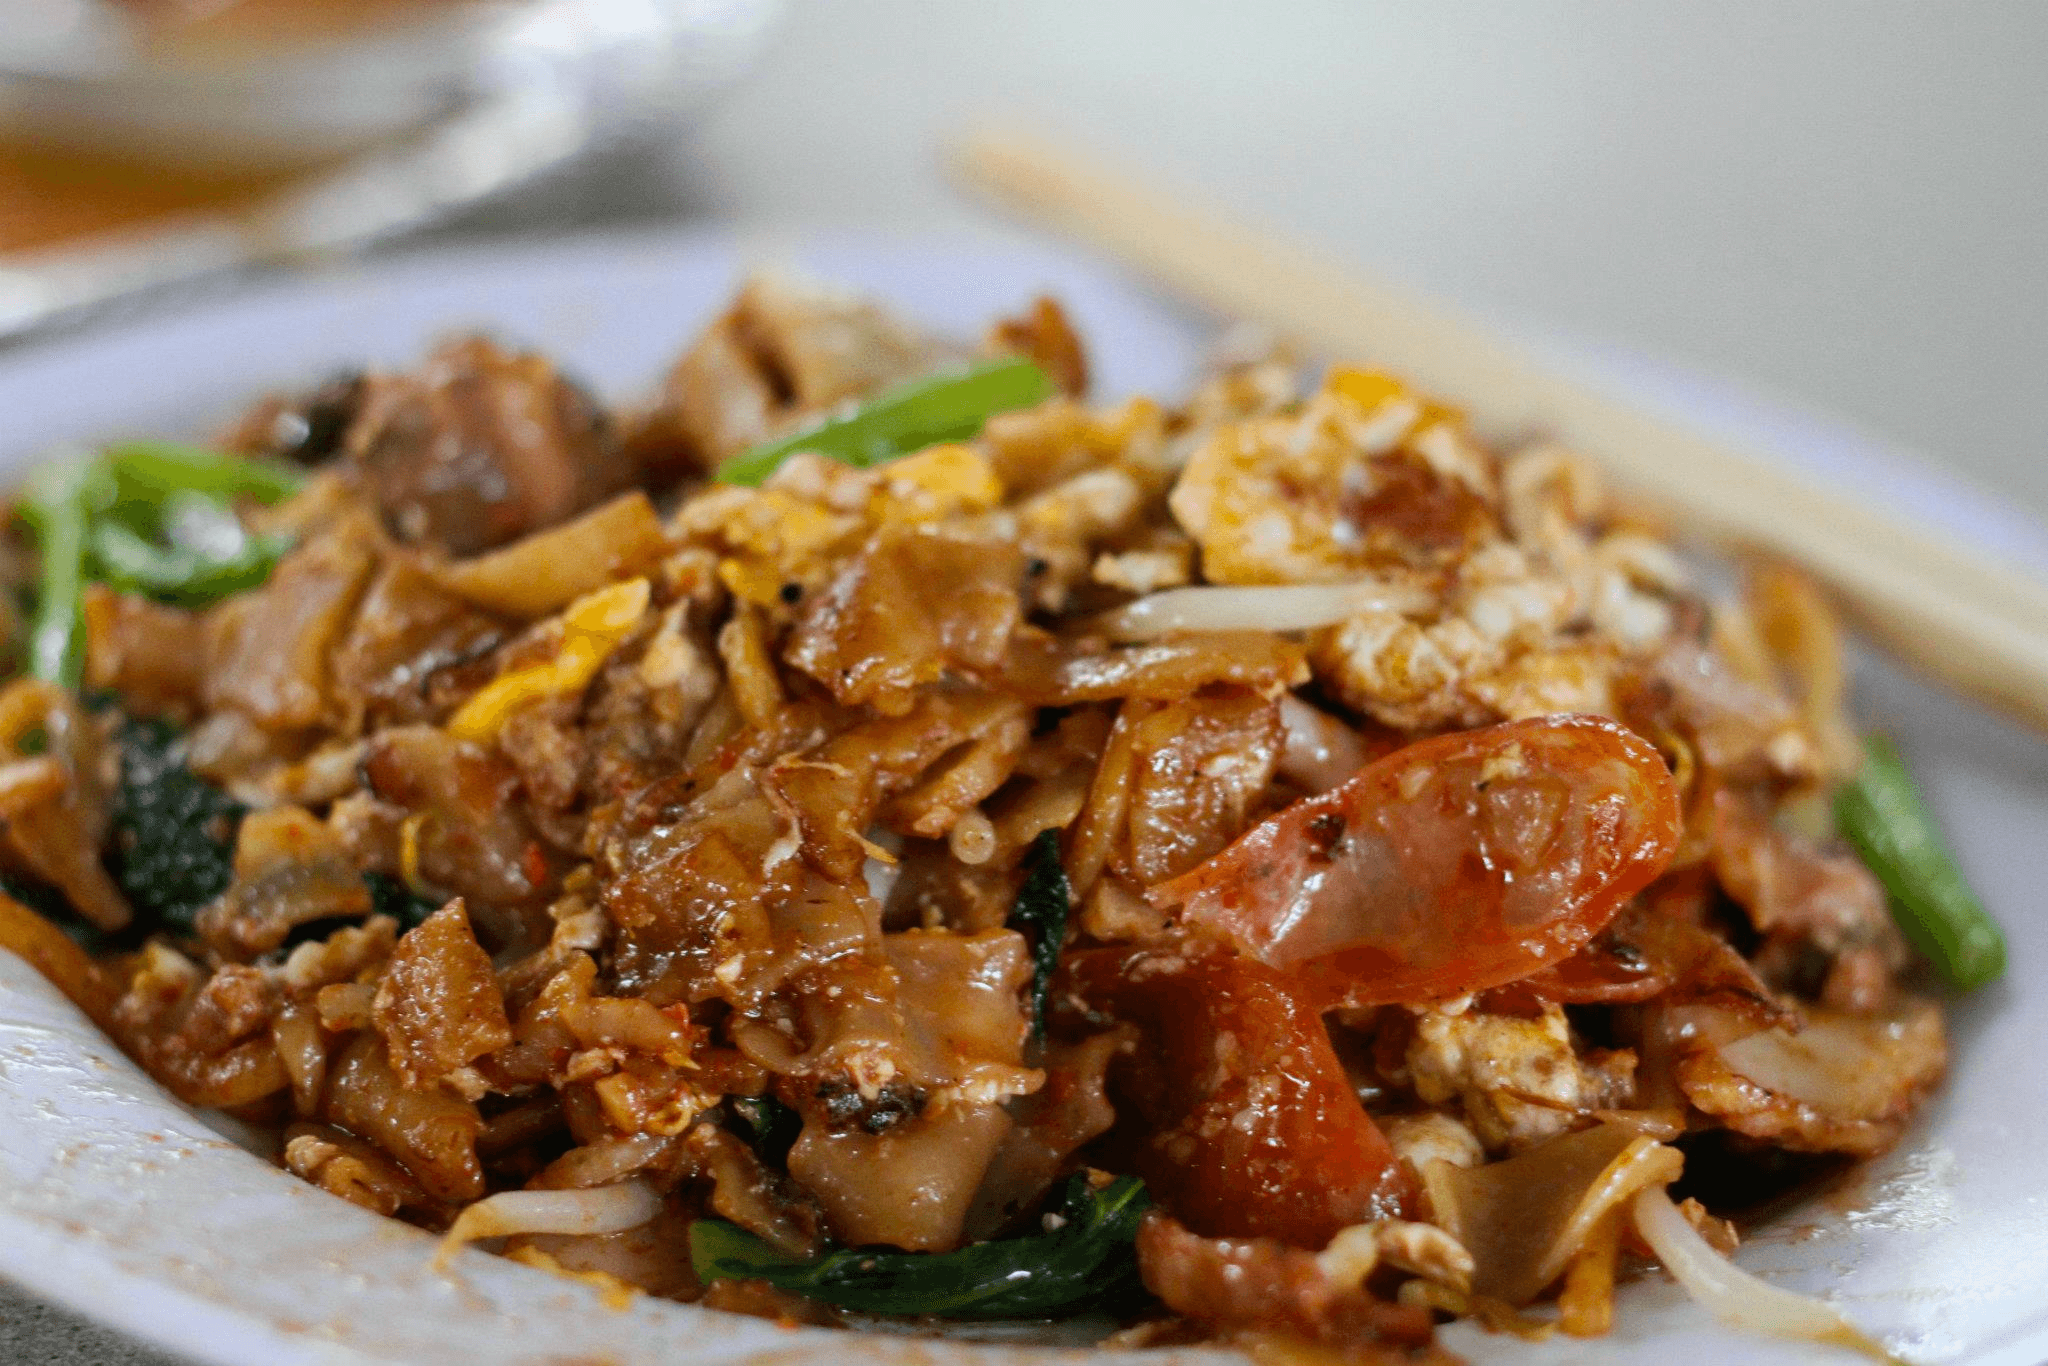 Source: Guan Kee Fried Kway Teow